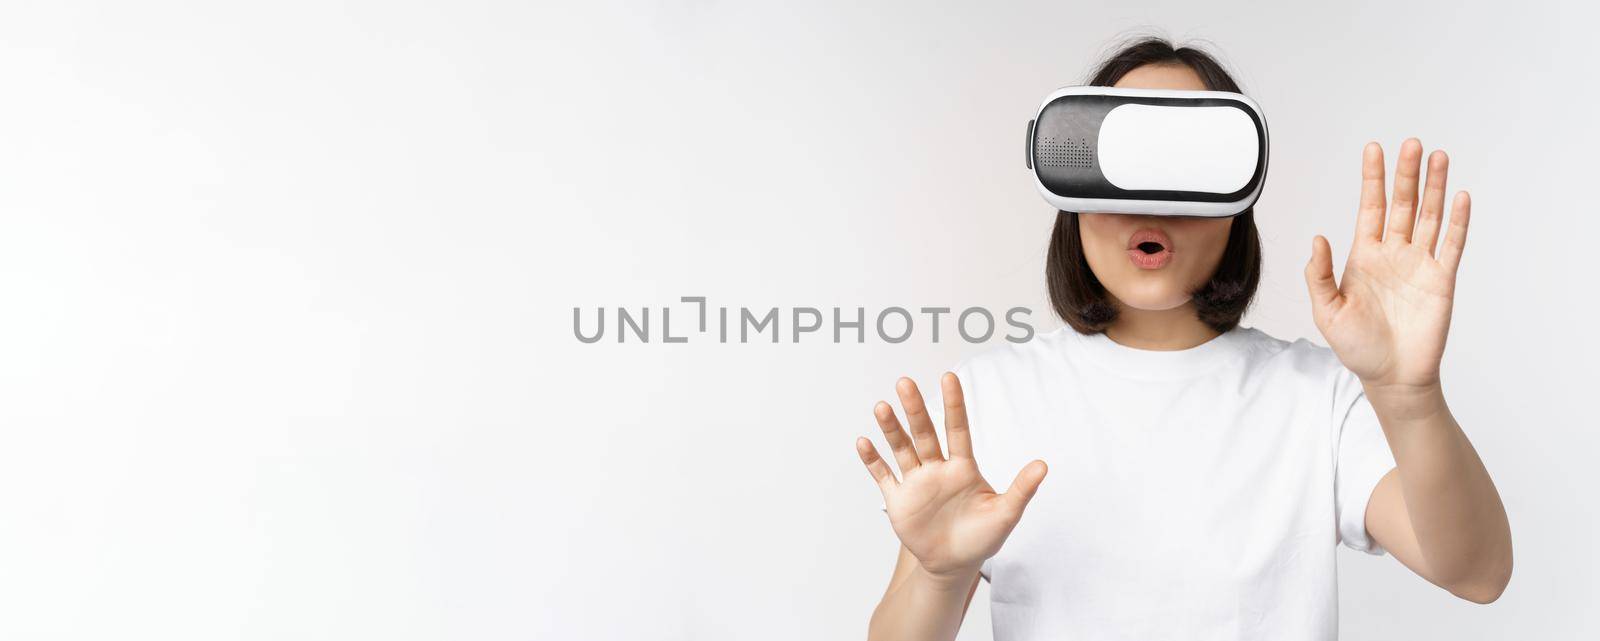 Amused asian girl using VR glasses, virtual reality headset and reaching hands into empty space, touching smth augmented, standing over white background.